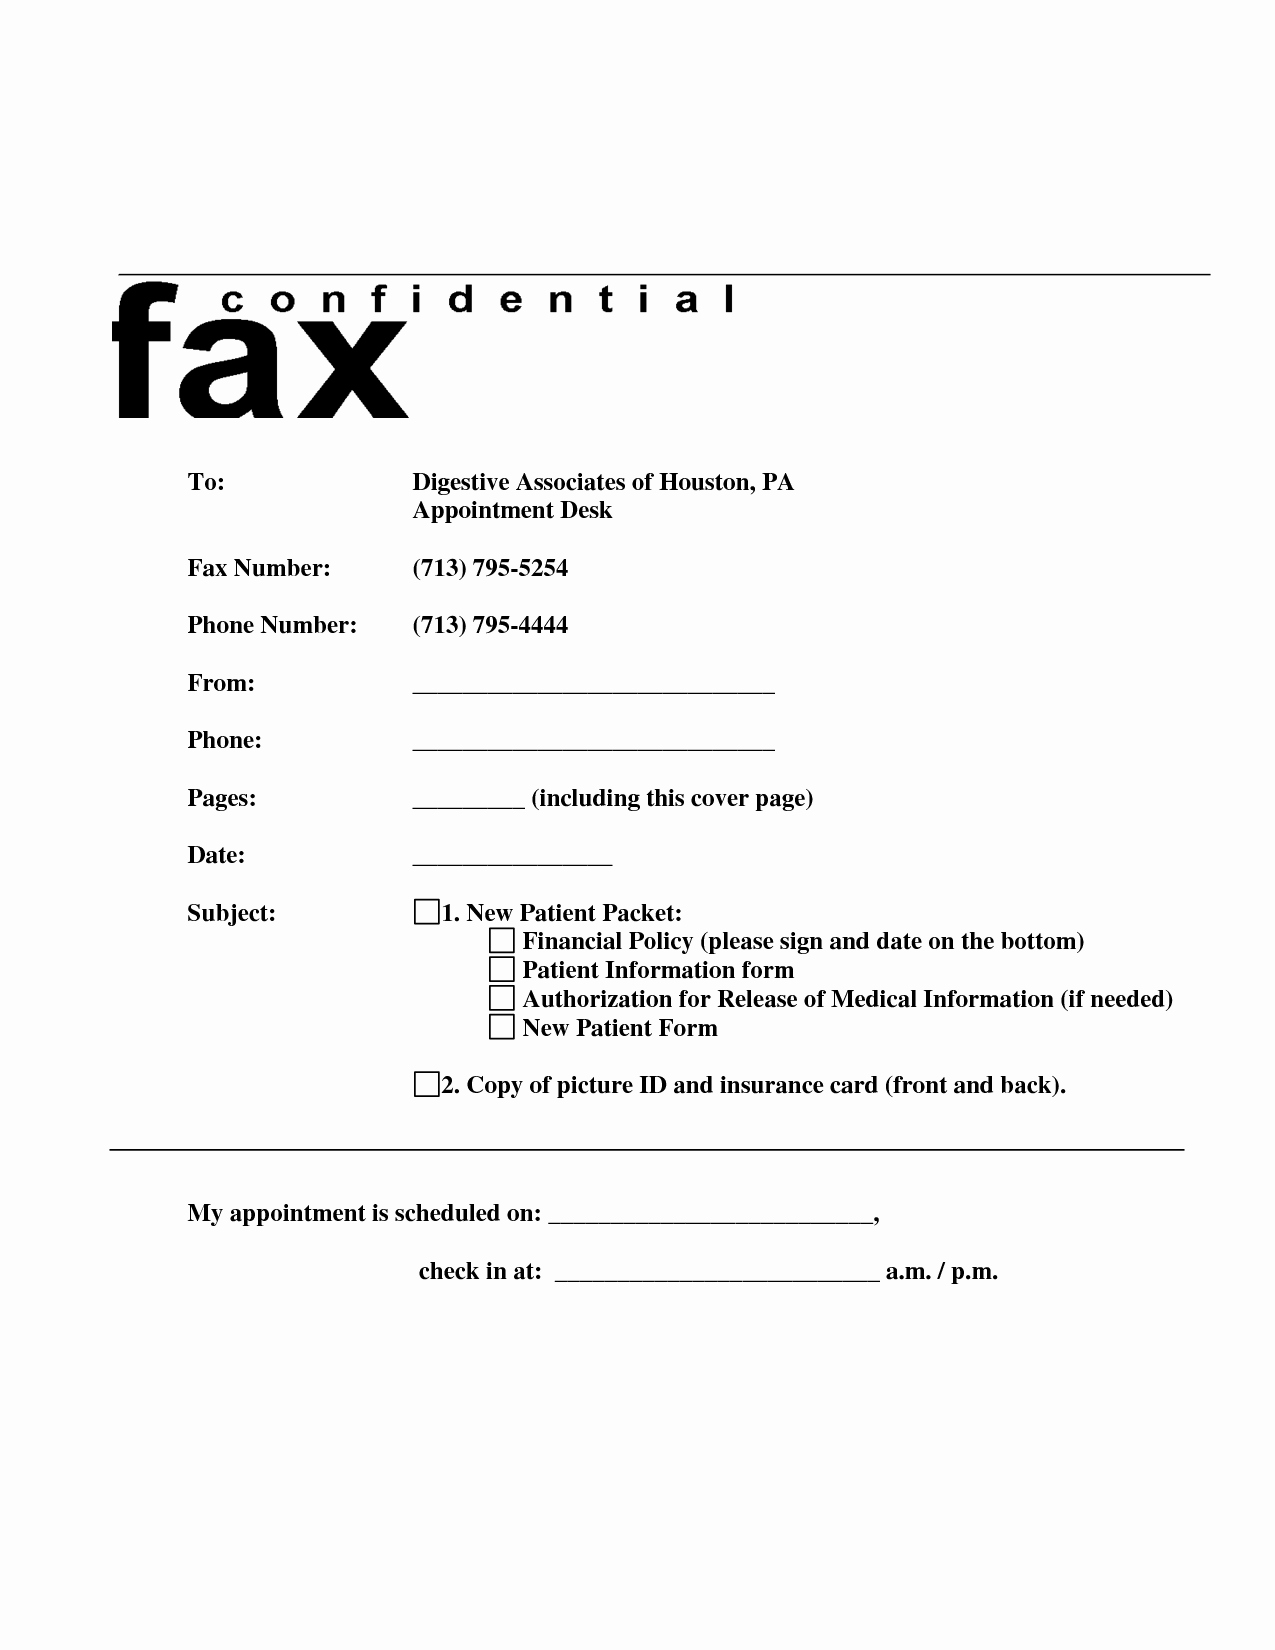 Medical Fax Cover Sheet Template Unique 8 Best Of Health Information Fax Cover Sheet